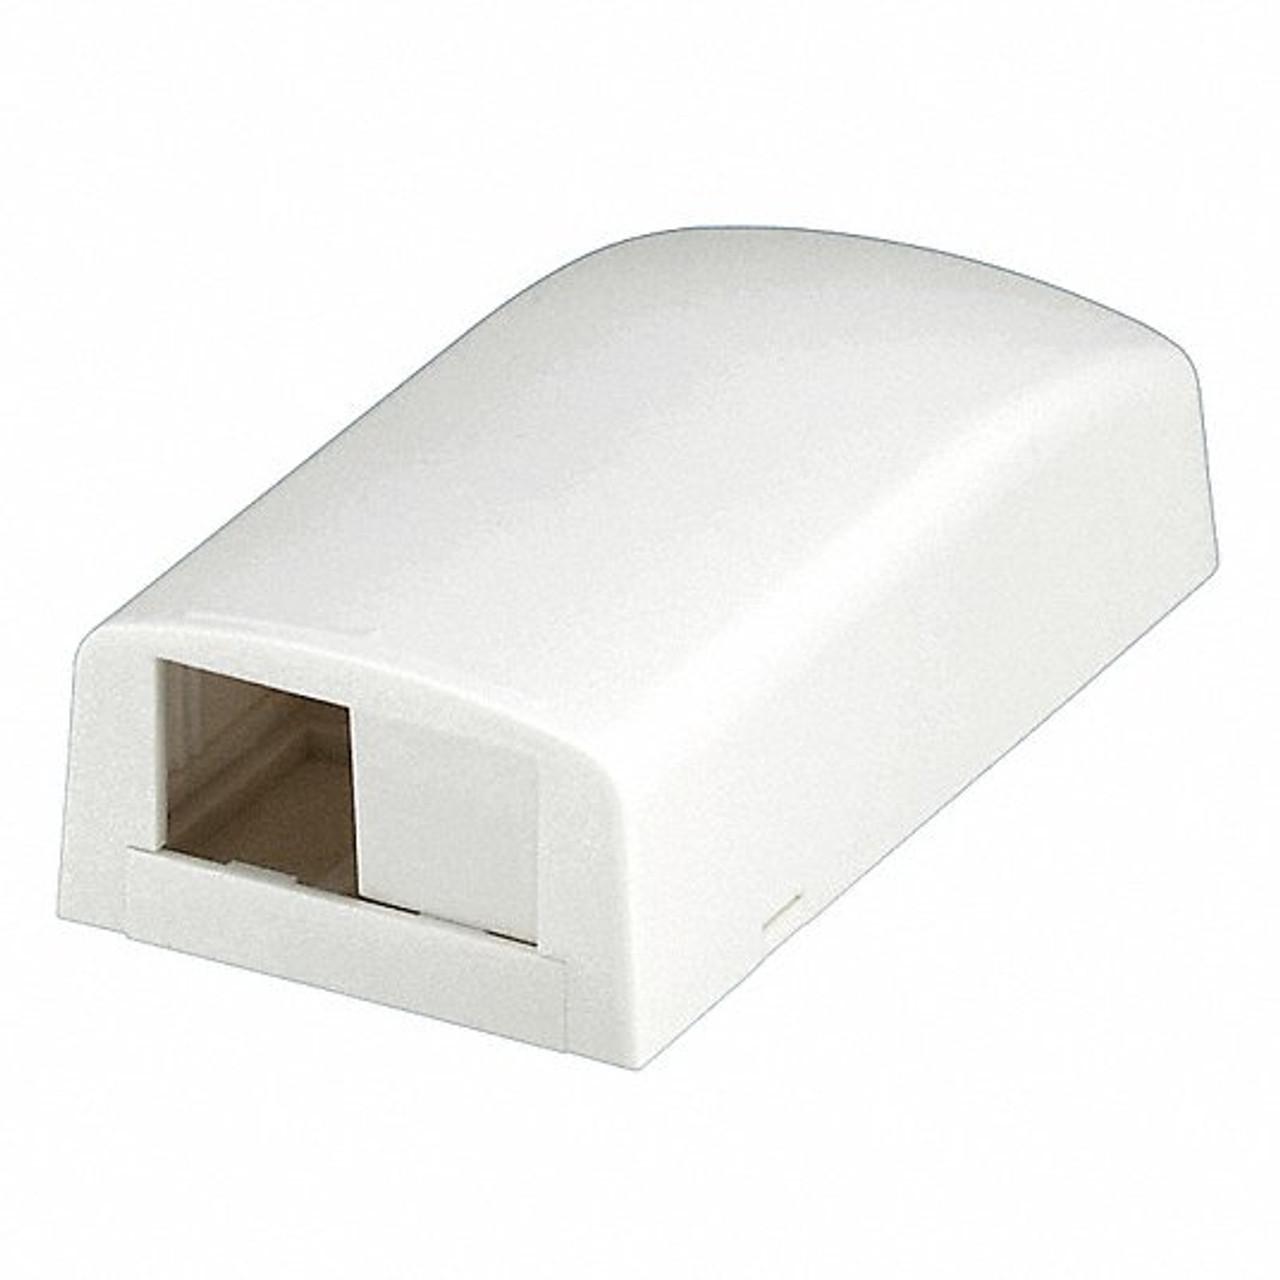 Panduit CBX2IW-AY 1.95" x 1.06" x 3.65", Off White, ABS, Adhesive Tape/Screw, 2-Port, Low Profile, Module